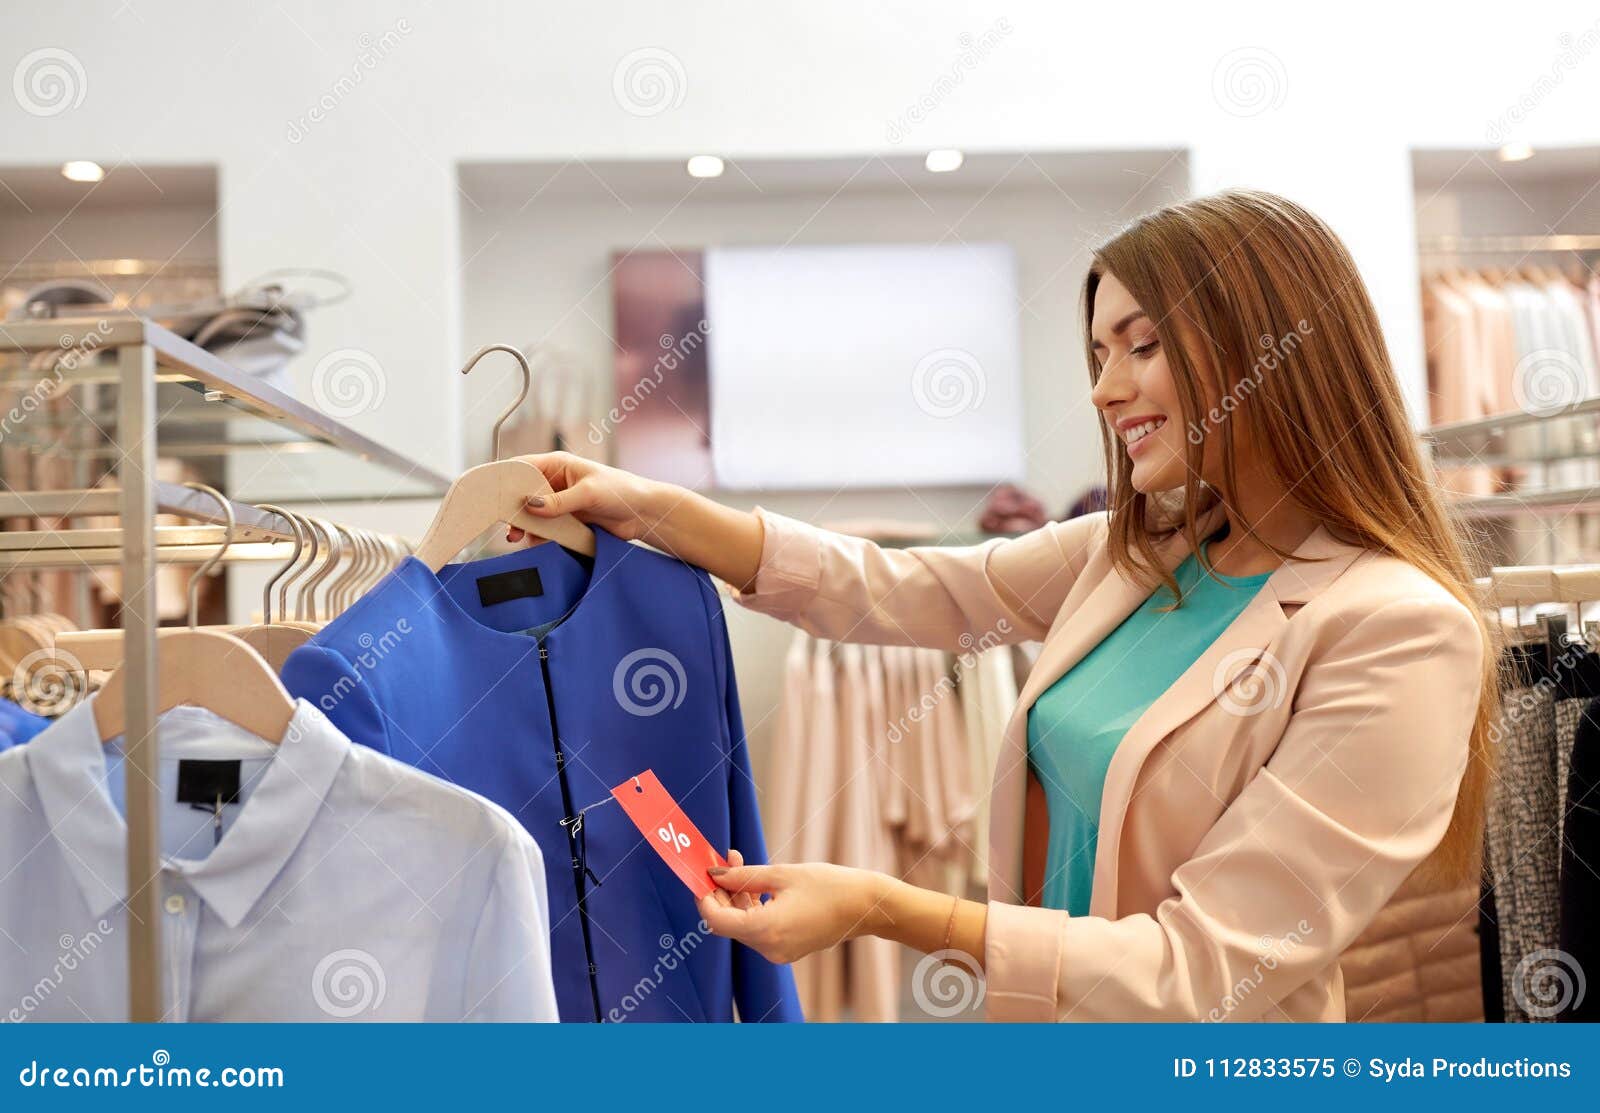 Happy Woman Choosing Clothes at Clothing Store Stock Image - Image of ...